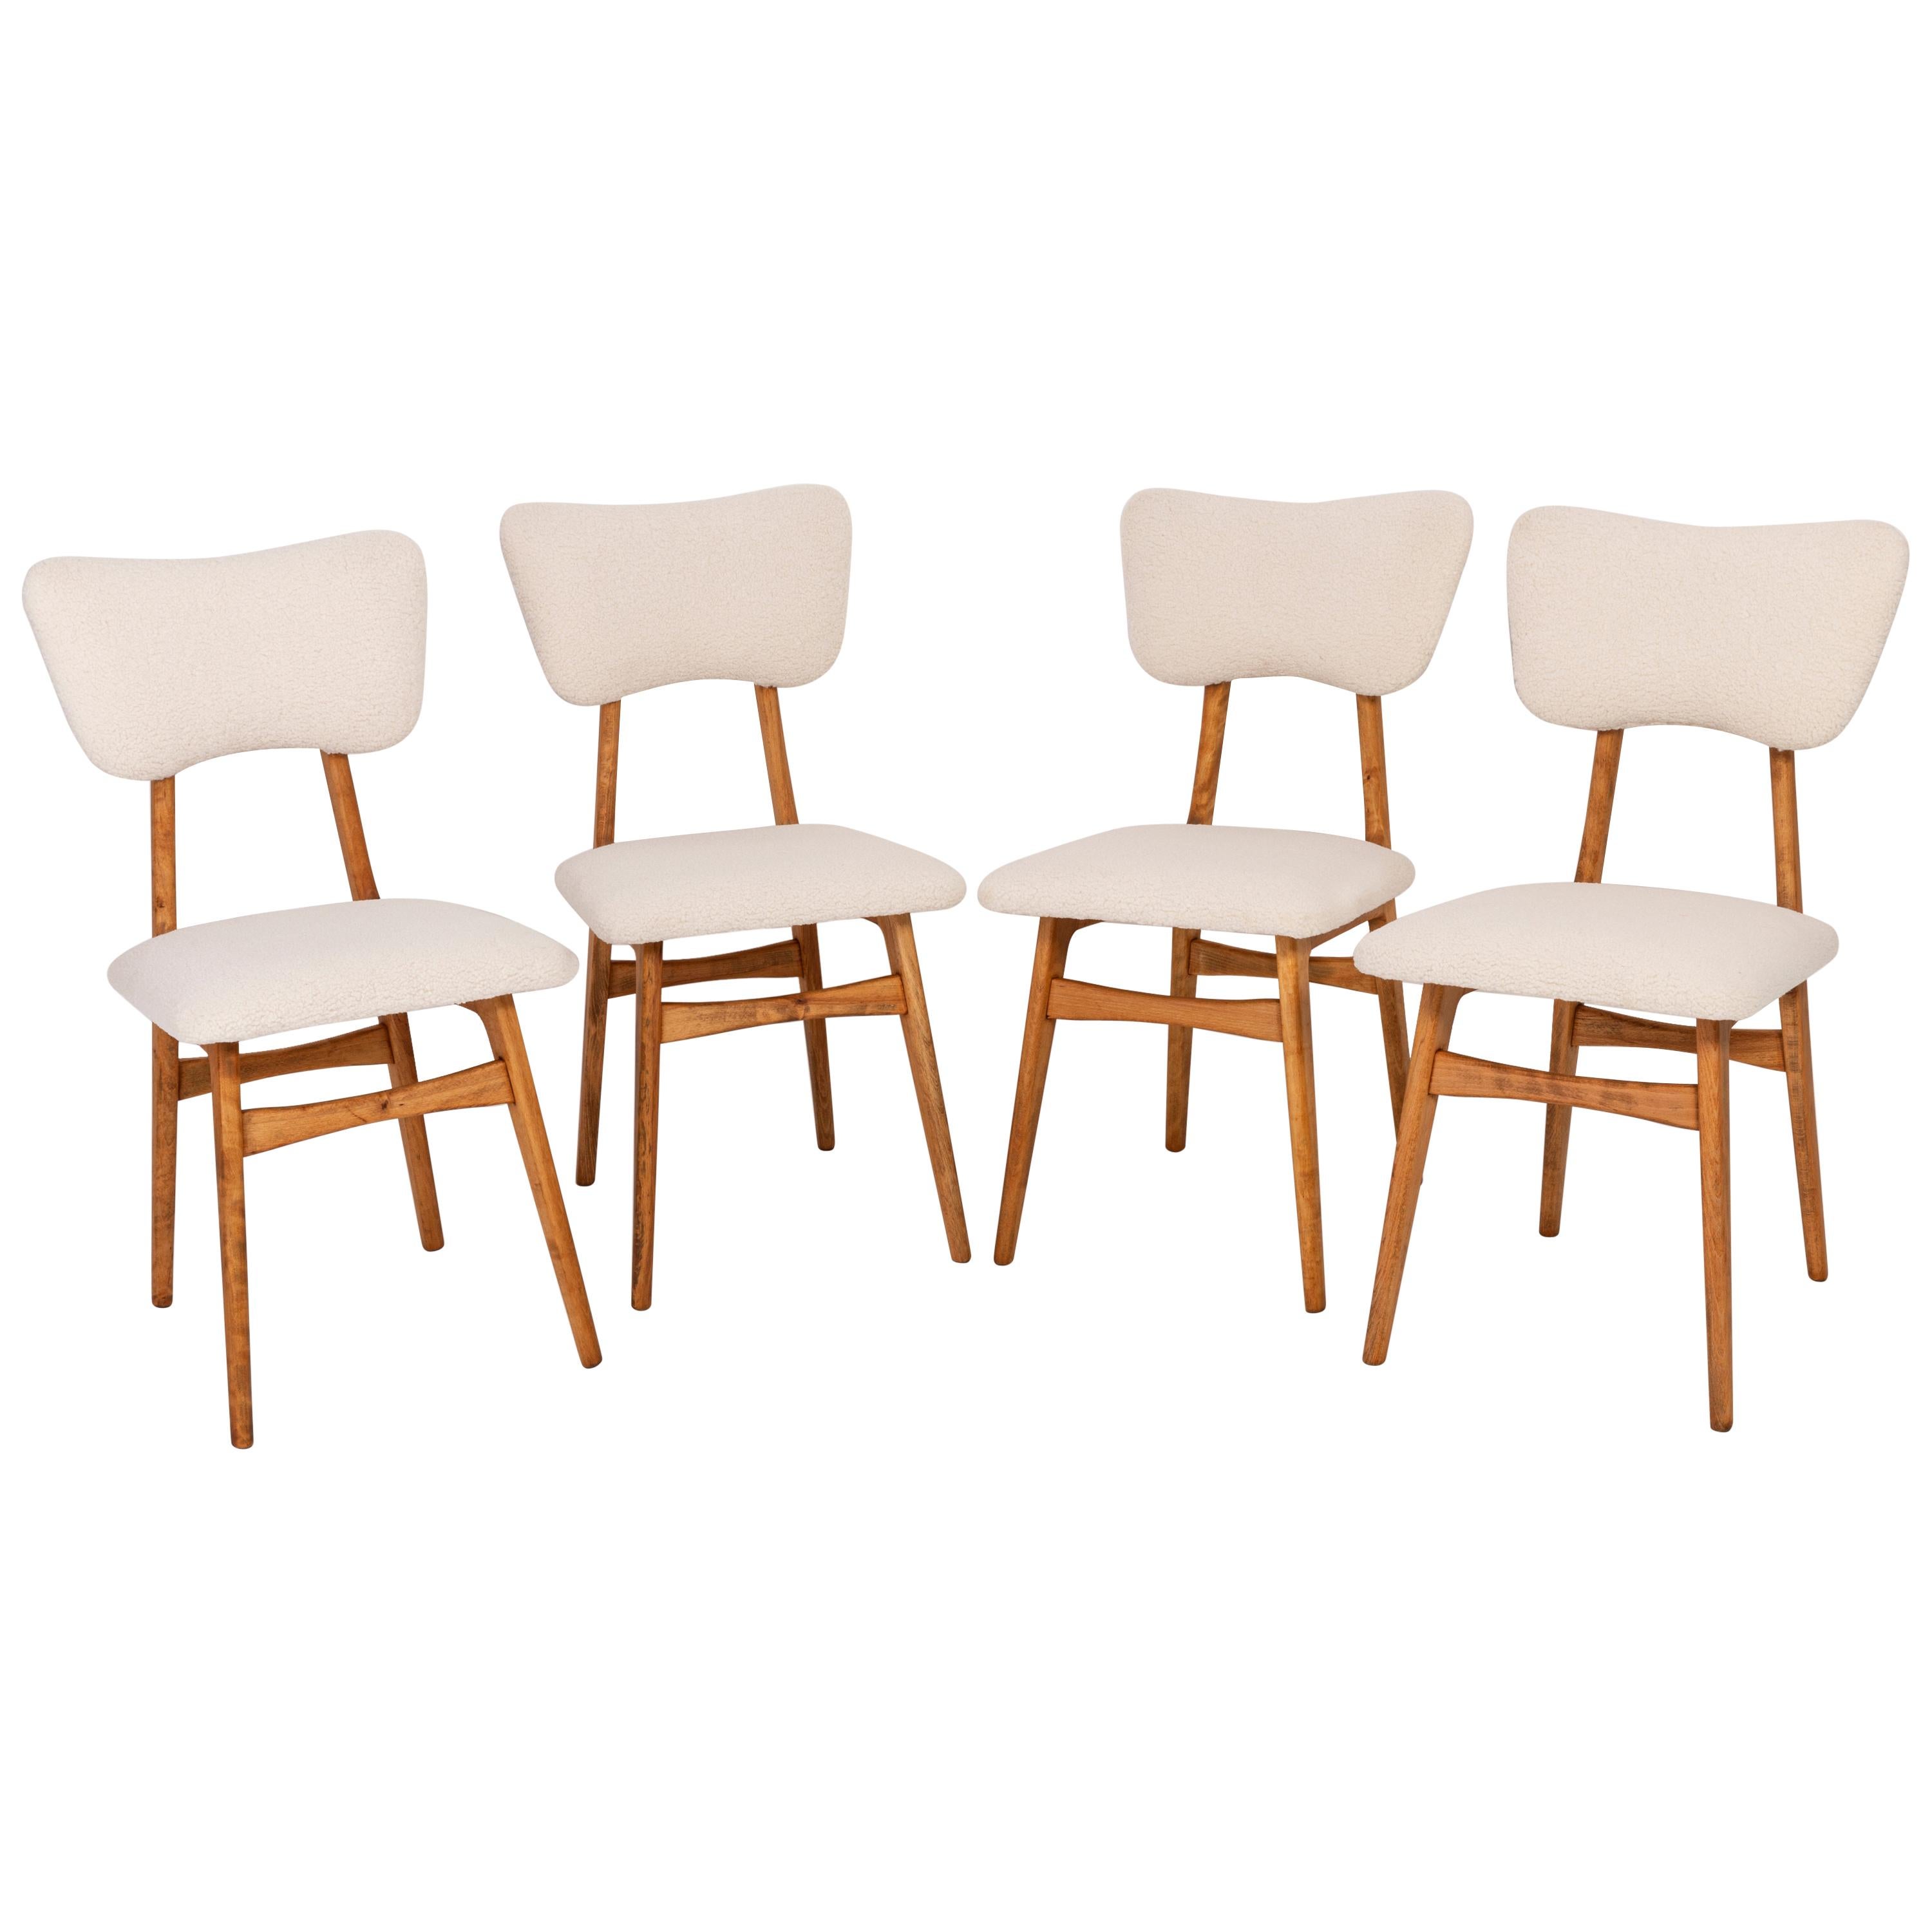 Set of Four 20th Century Light Crème Boucle Chairs, 1960s For Sale